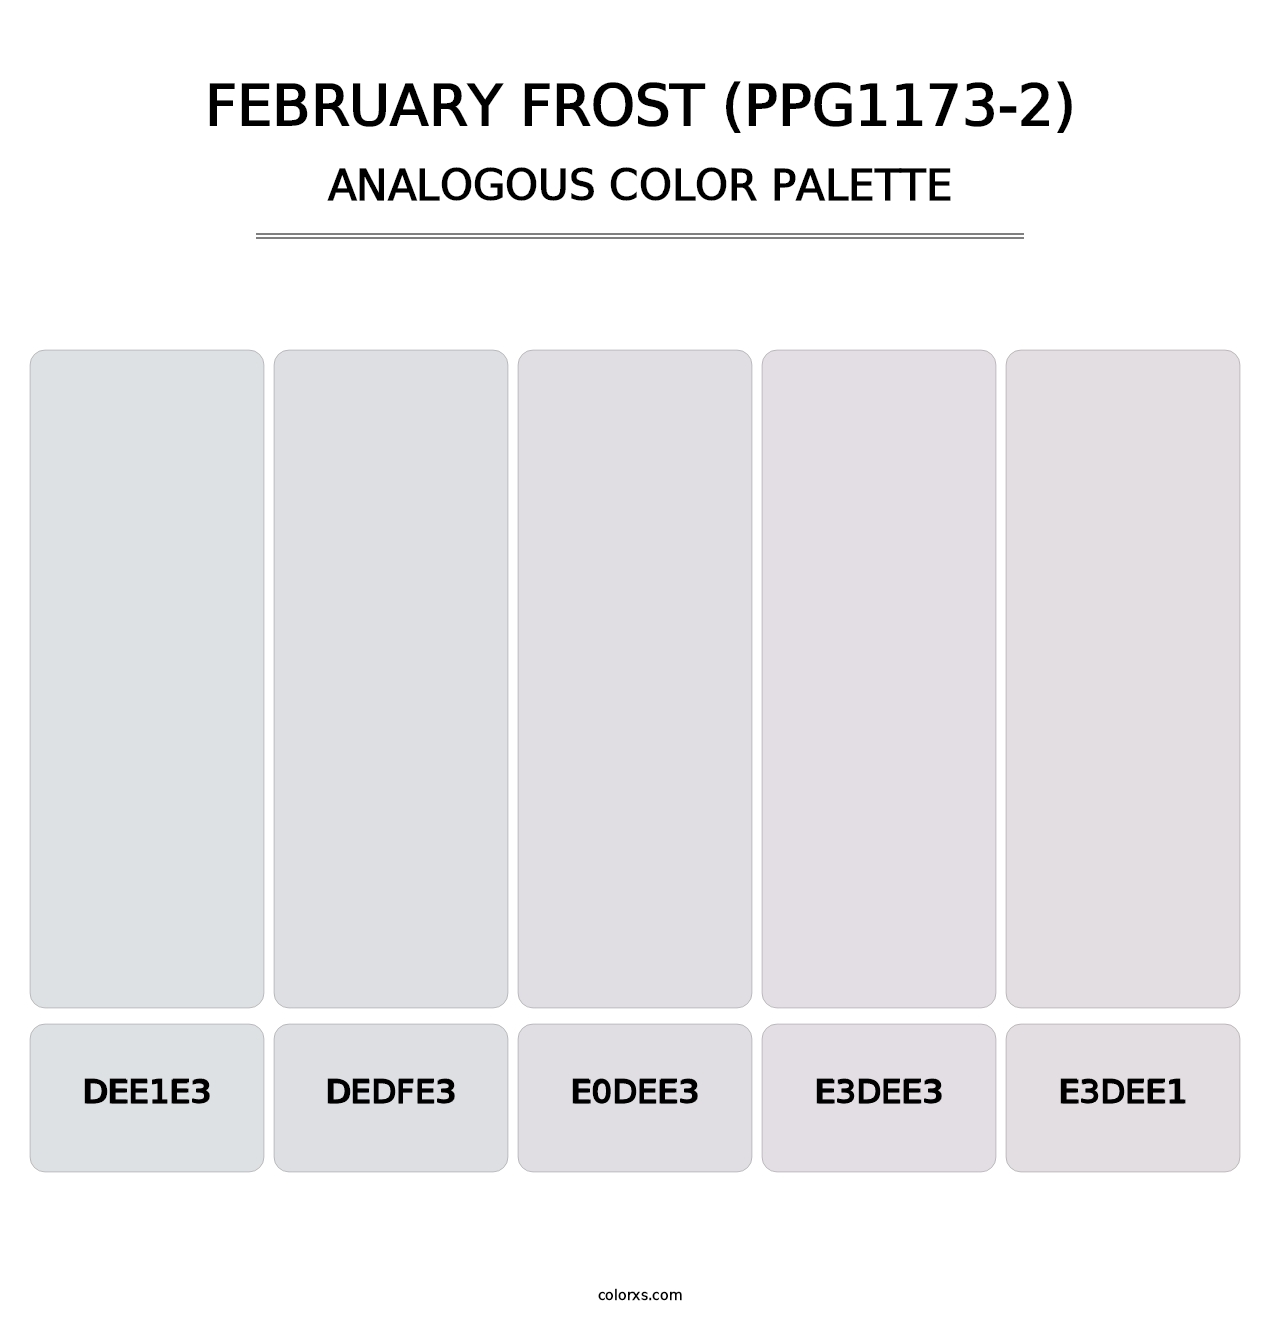 February Frost (PPG1173-2) - Analogous Color Palette